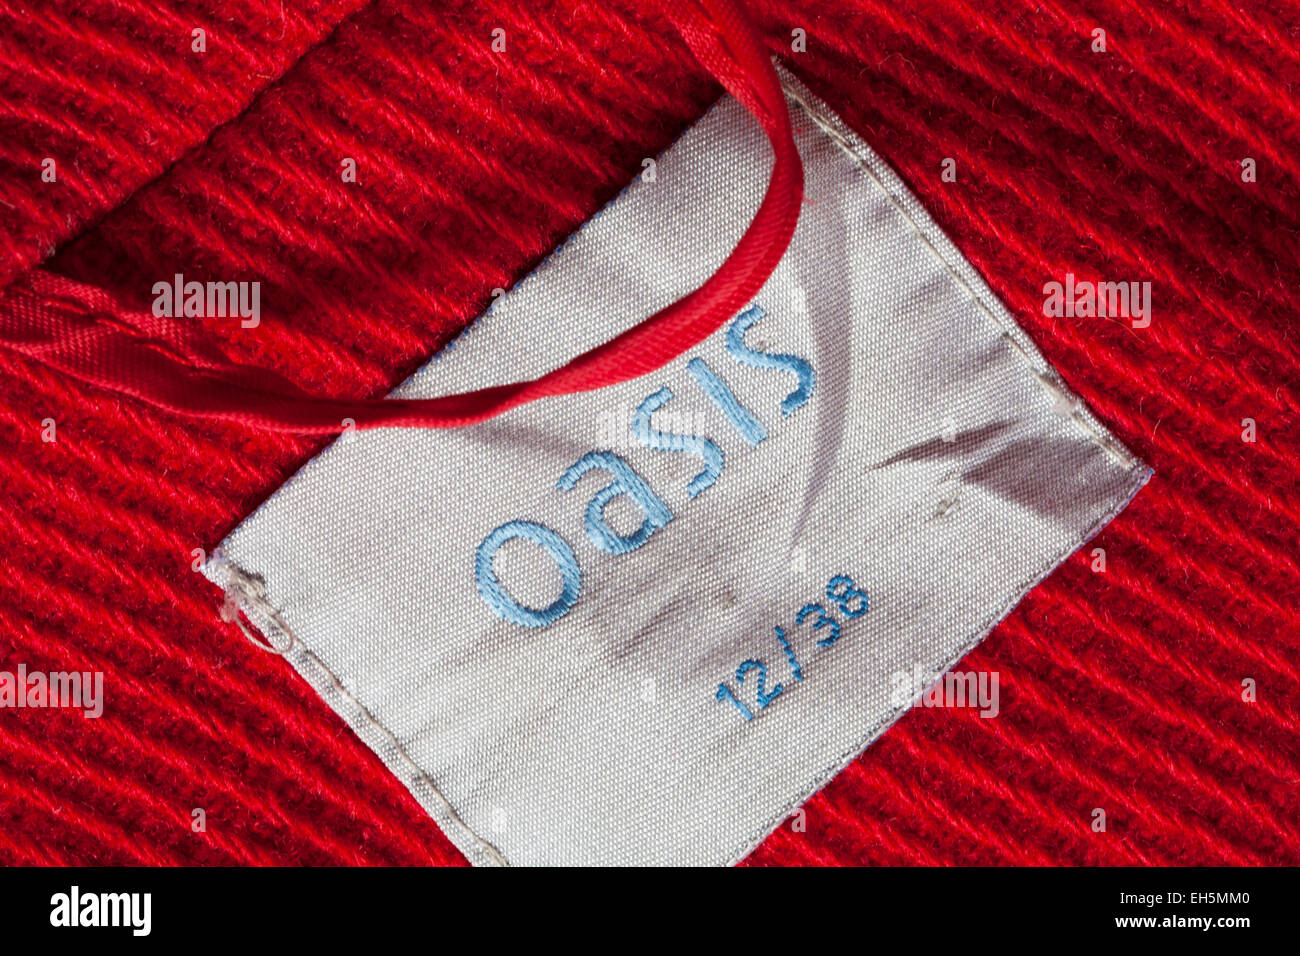 Oasis 12/38 label in red coat clothing Stock Photo - Alamy